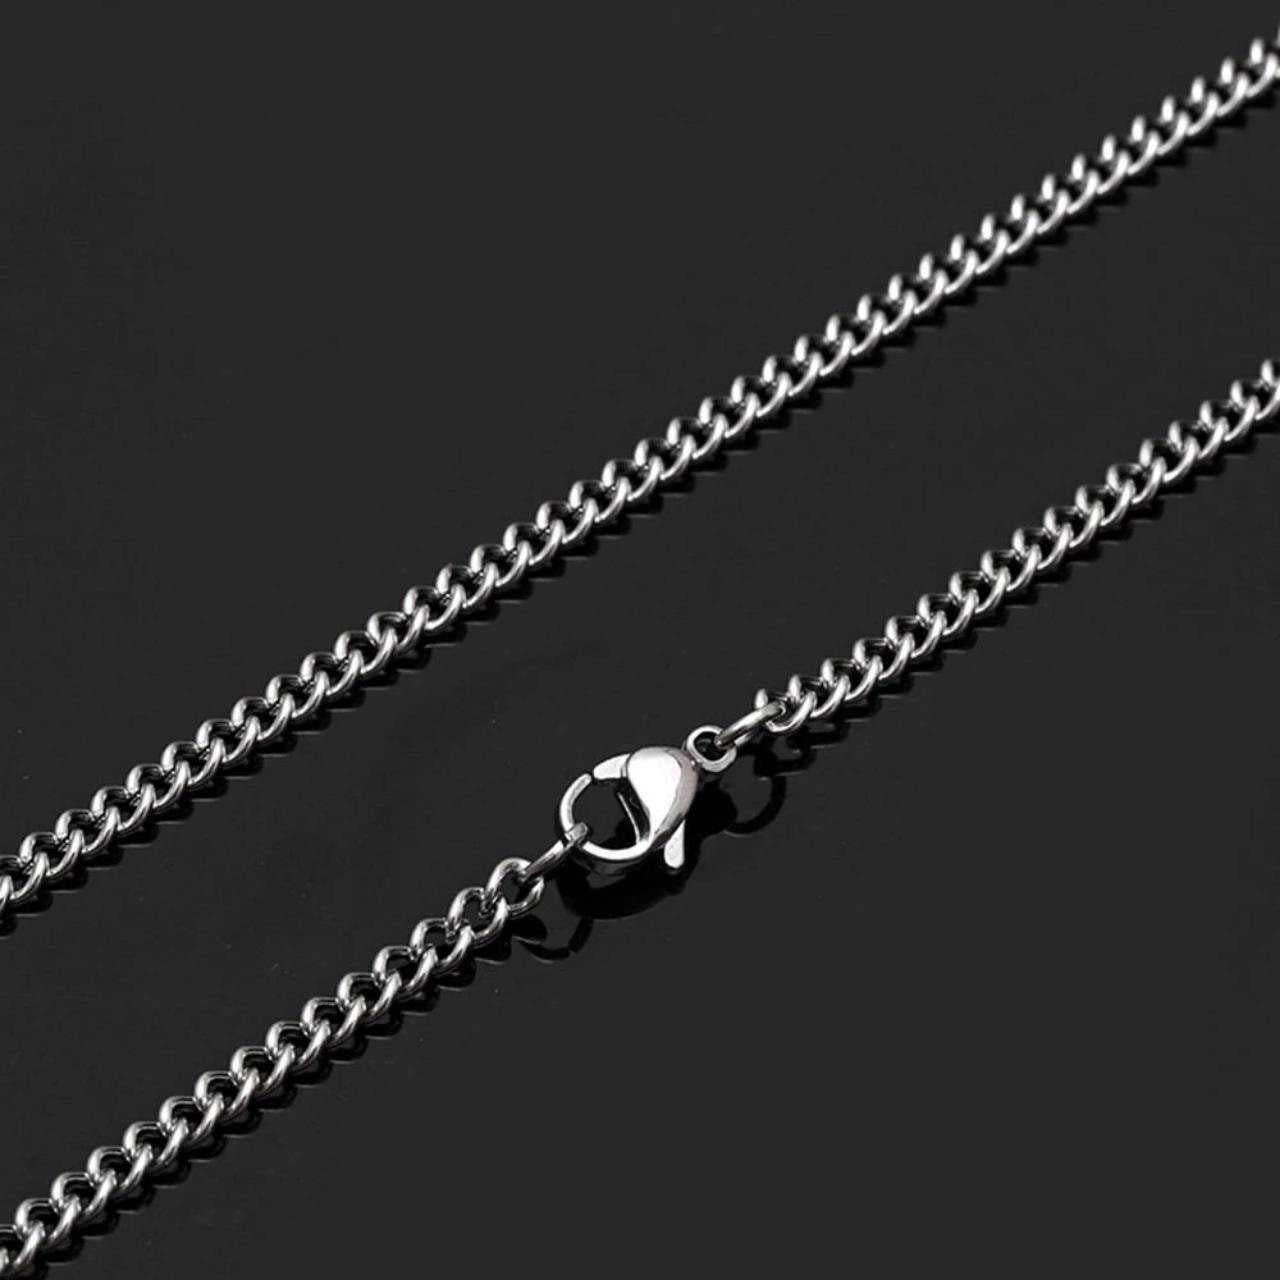 CRW Skull Bead Necklace with 1.8mm curb chain in silver - Shape Necklaces for Women - Dark Goth Necklace for Men - Necklace with Pendant